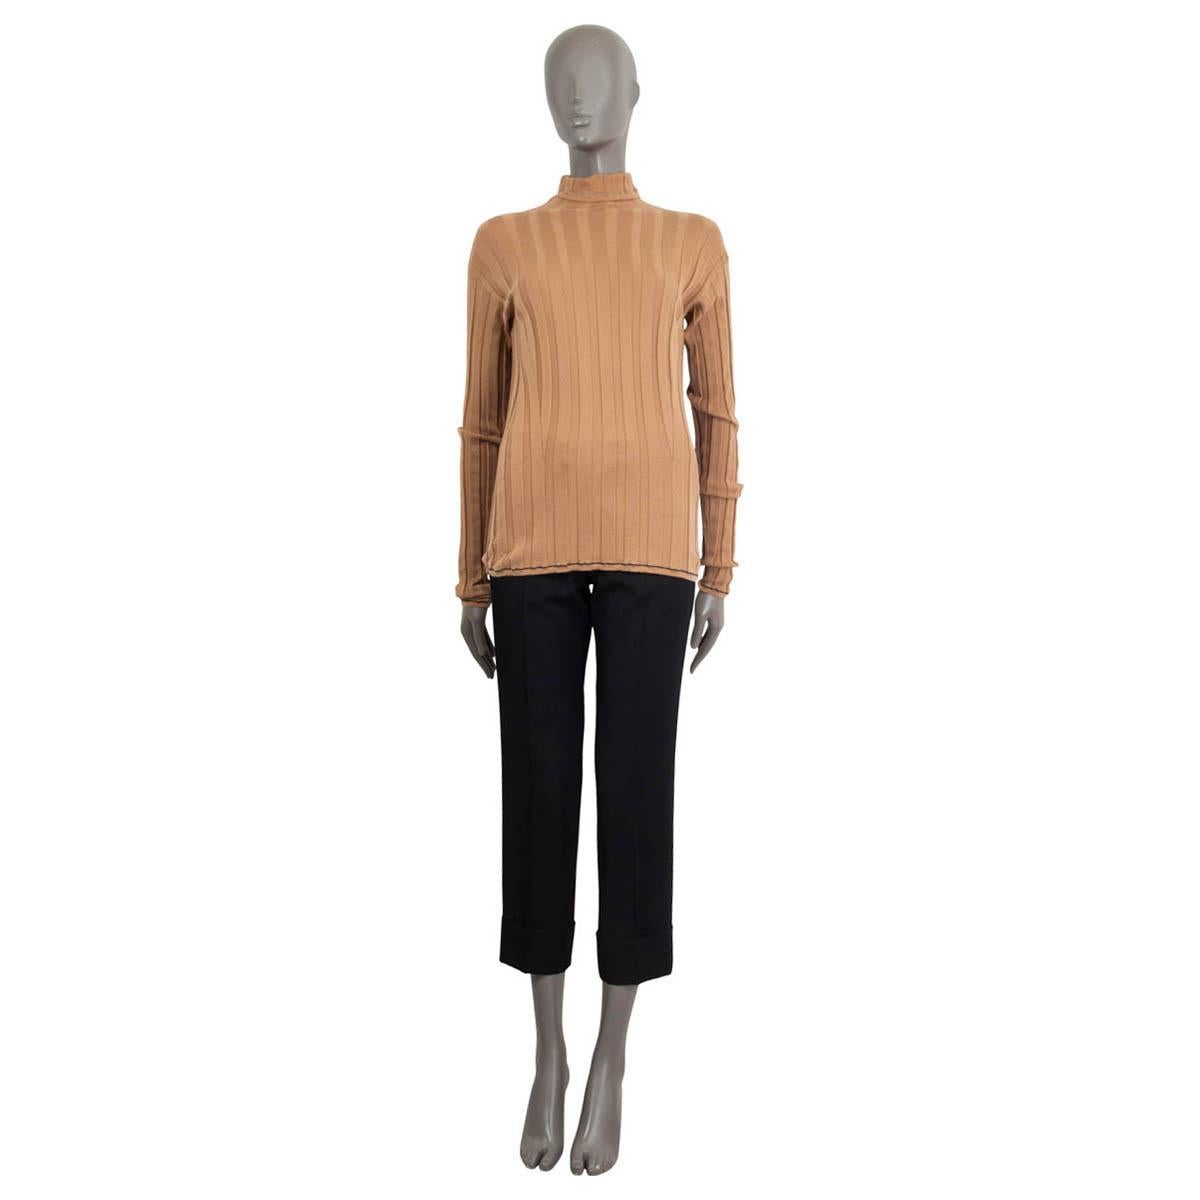 100% authentic Loro Piana long sleeve turtle neck top in camel cashmere (100%). Embellished with blue and grey seams on alongside the hemline, the turtle neck and the cuffs. Unlined. Has been worn and is in excellent condition.

Measurements
Tag